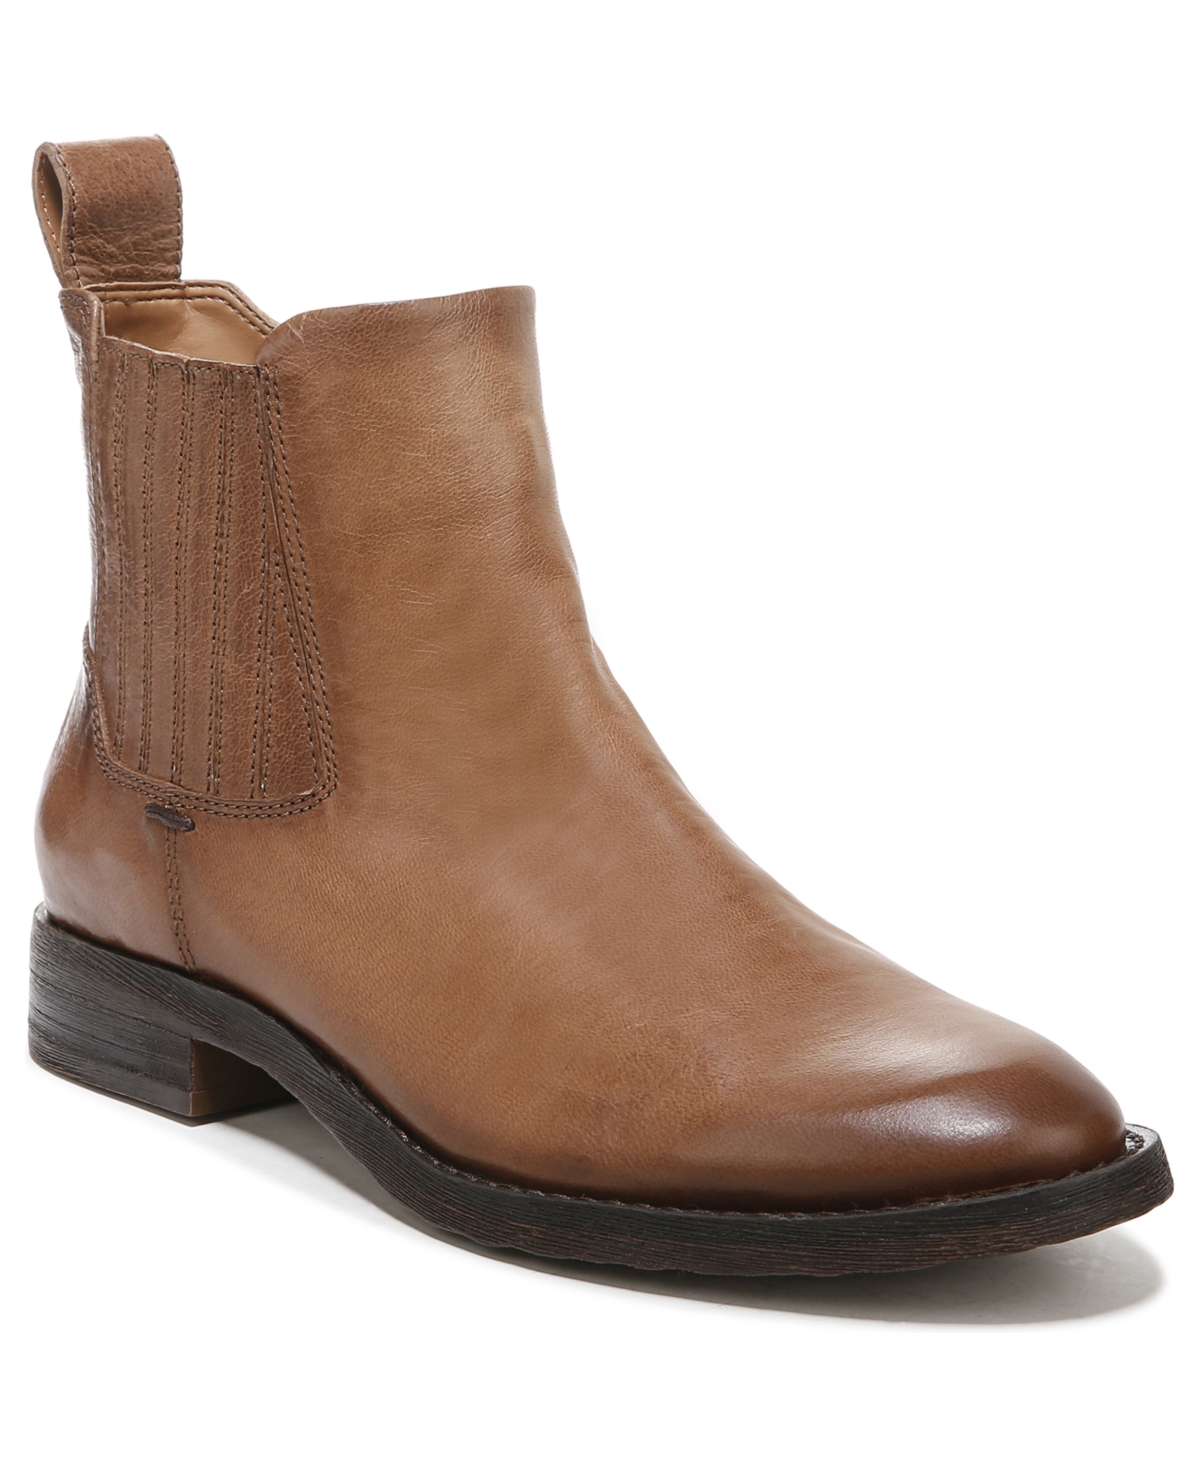 Linc Casual Leather Booties - Dark Brown Leather